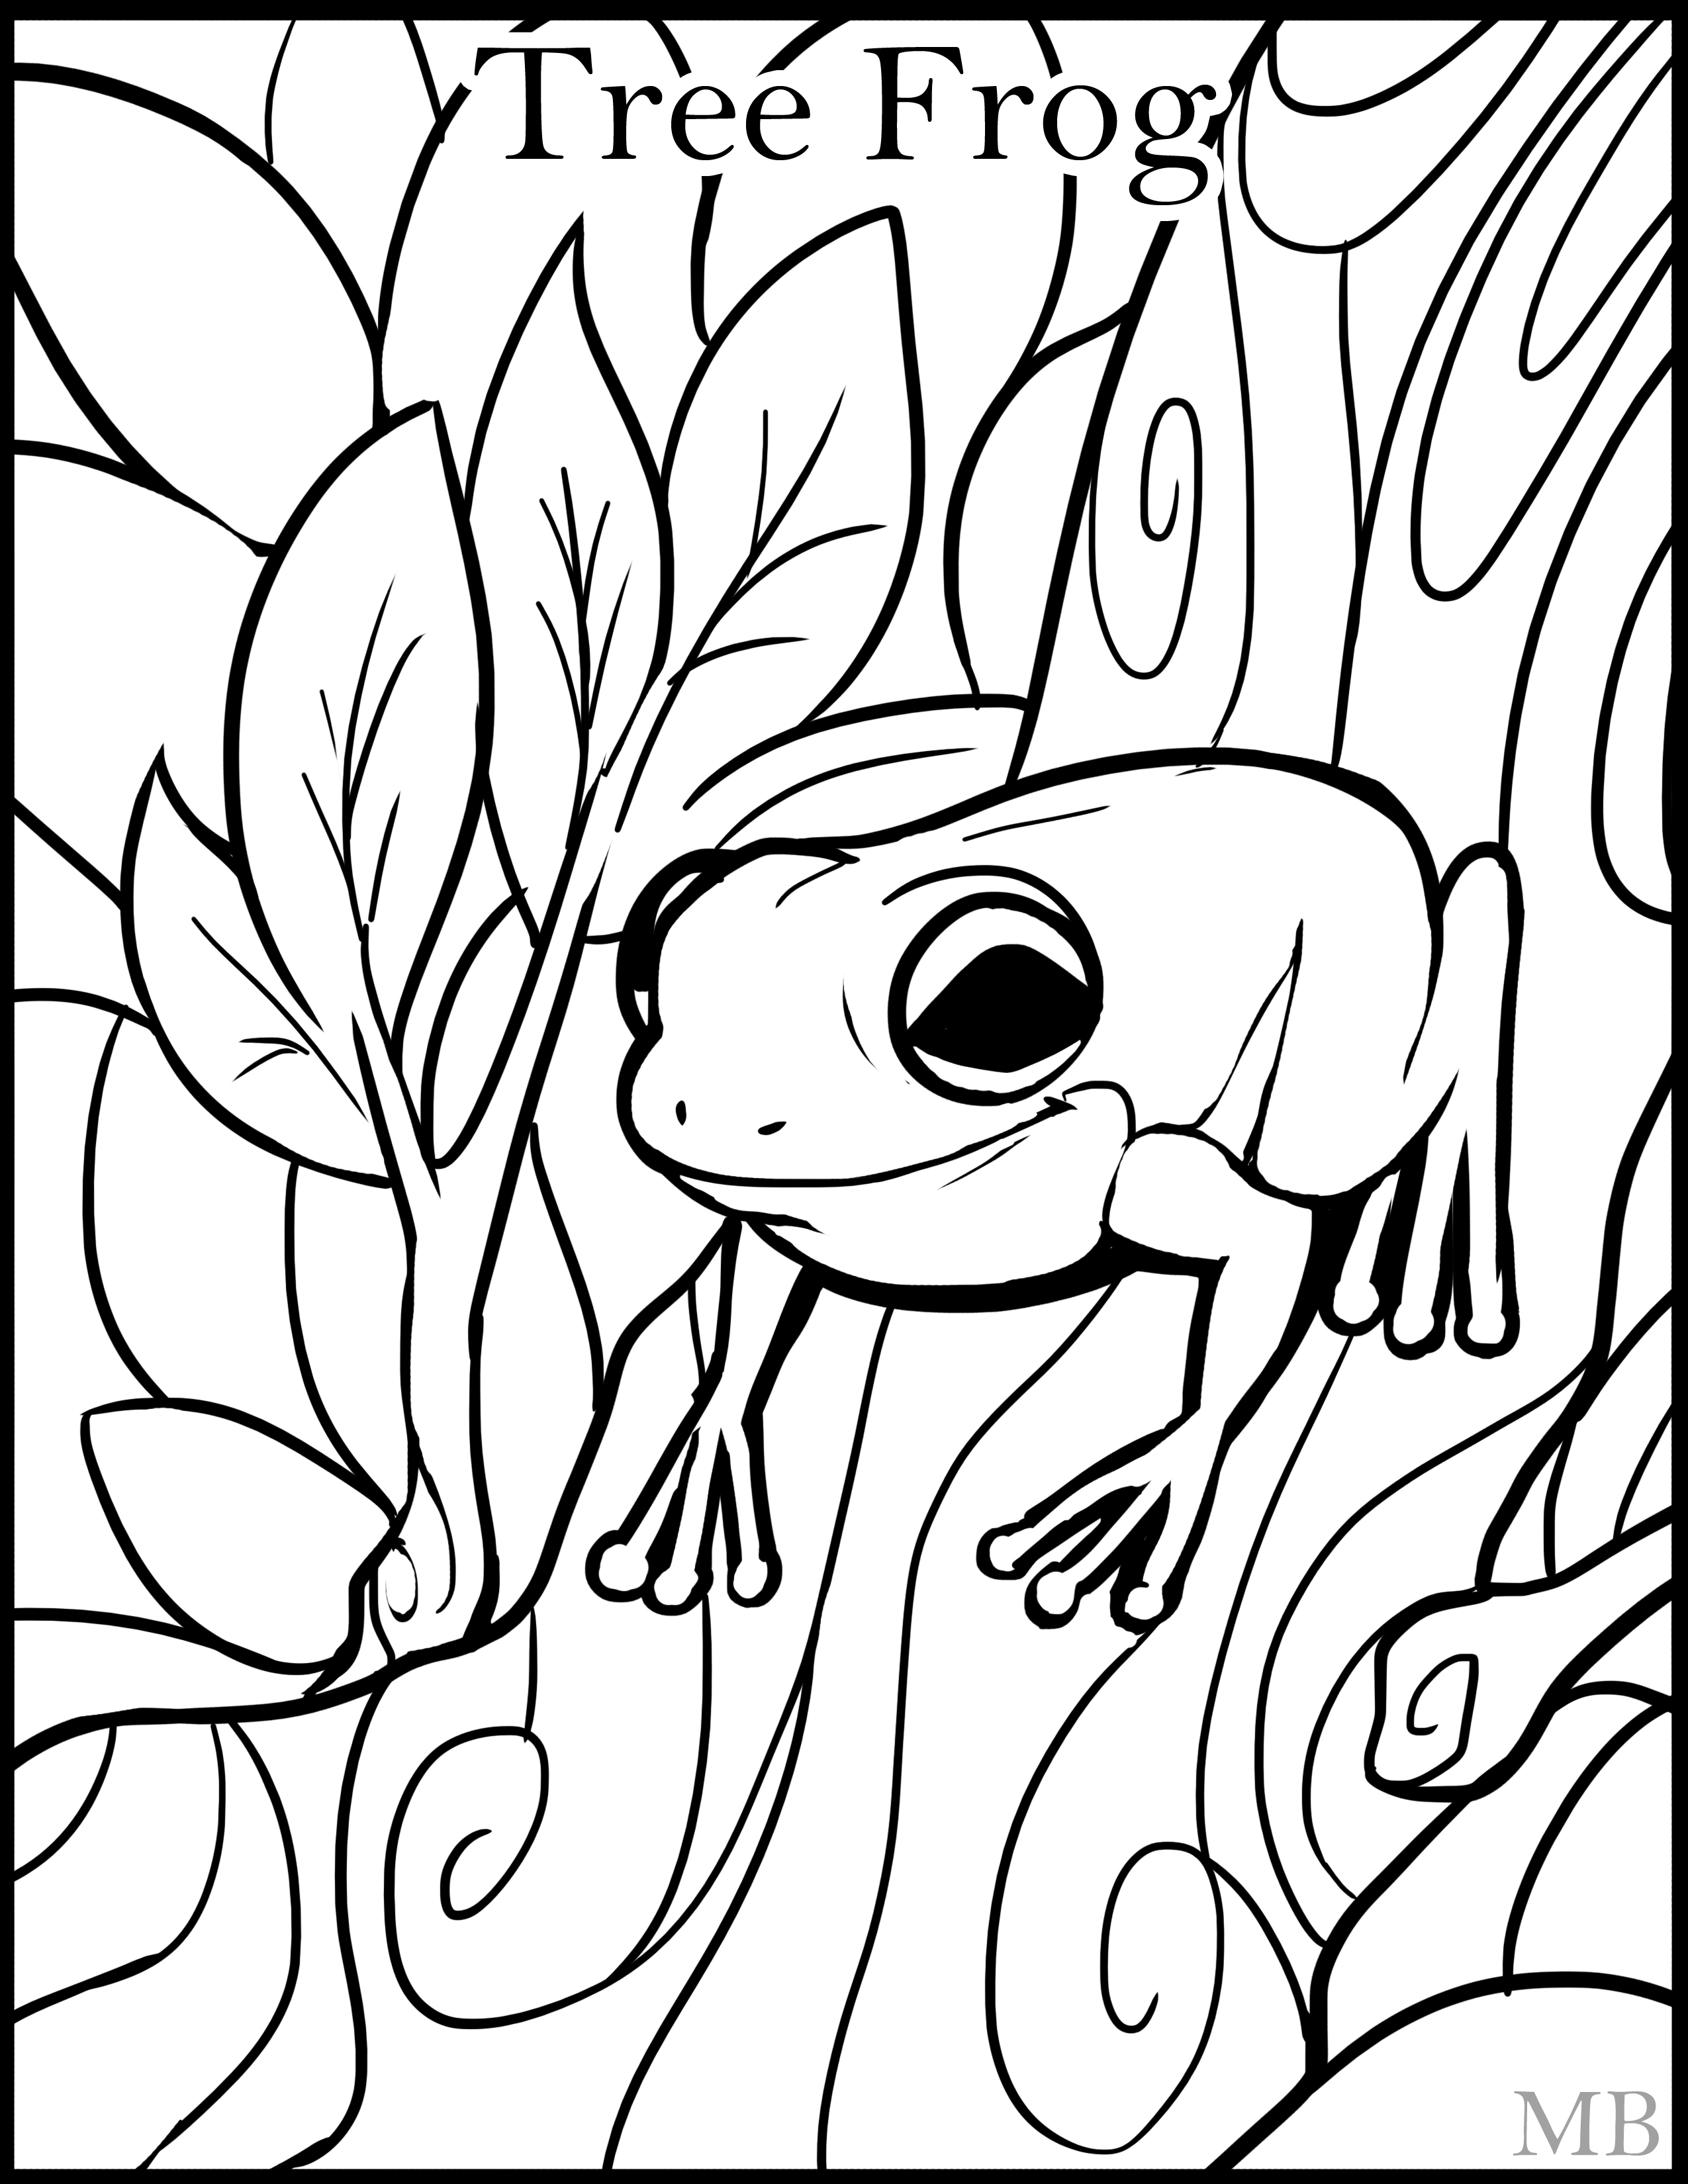 Realistic Frog Coloring Pages | Free download on ClipArtMag